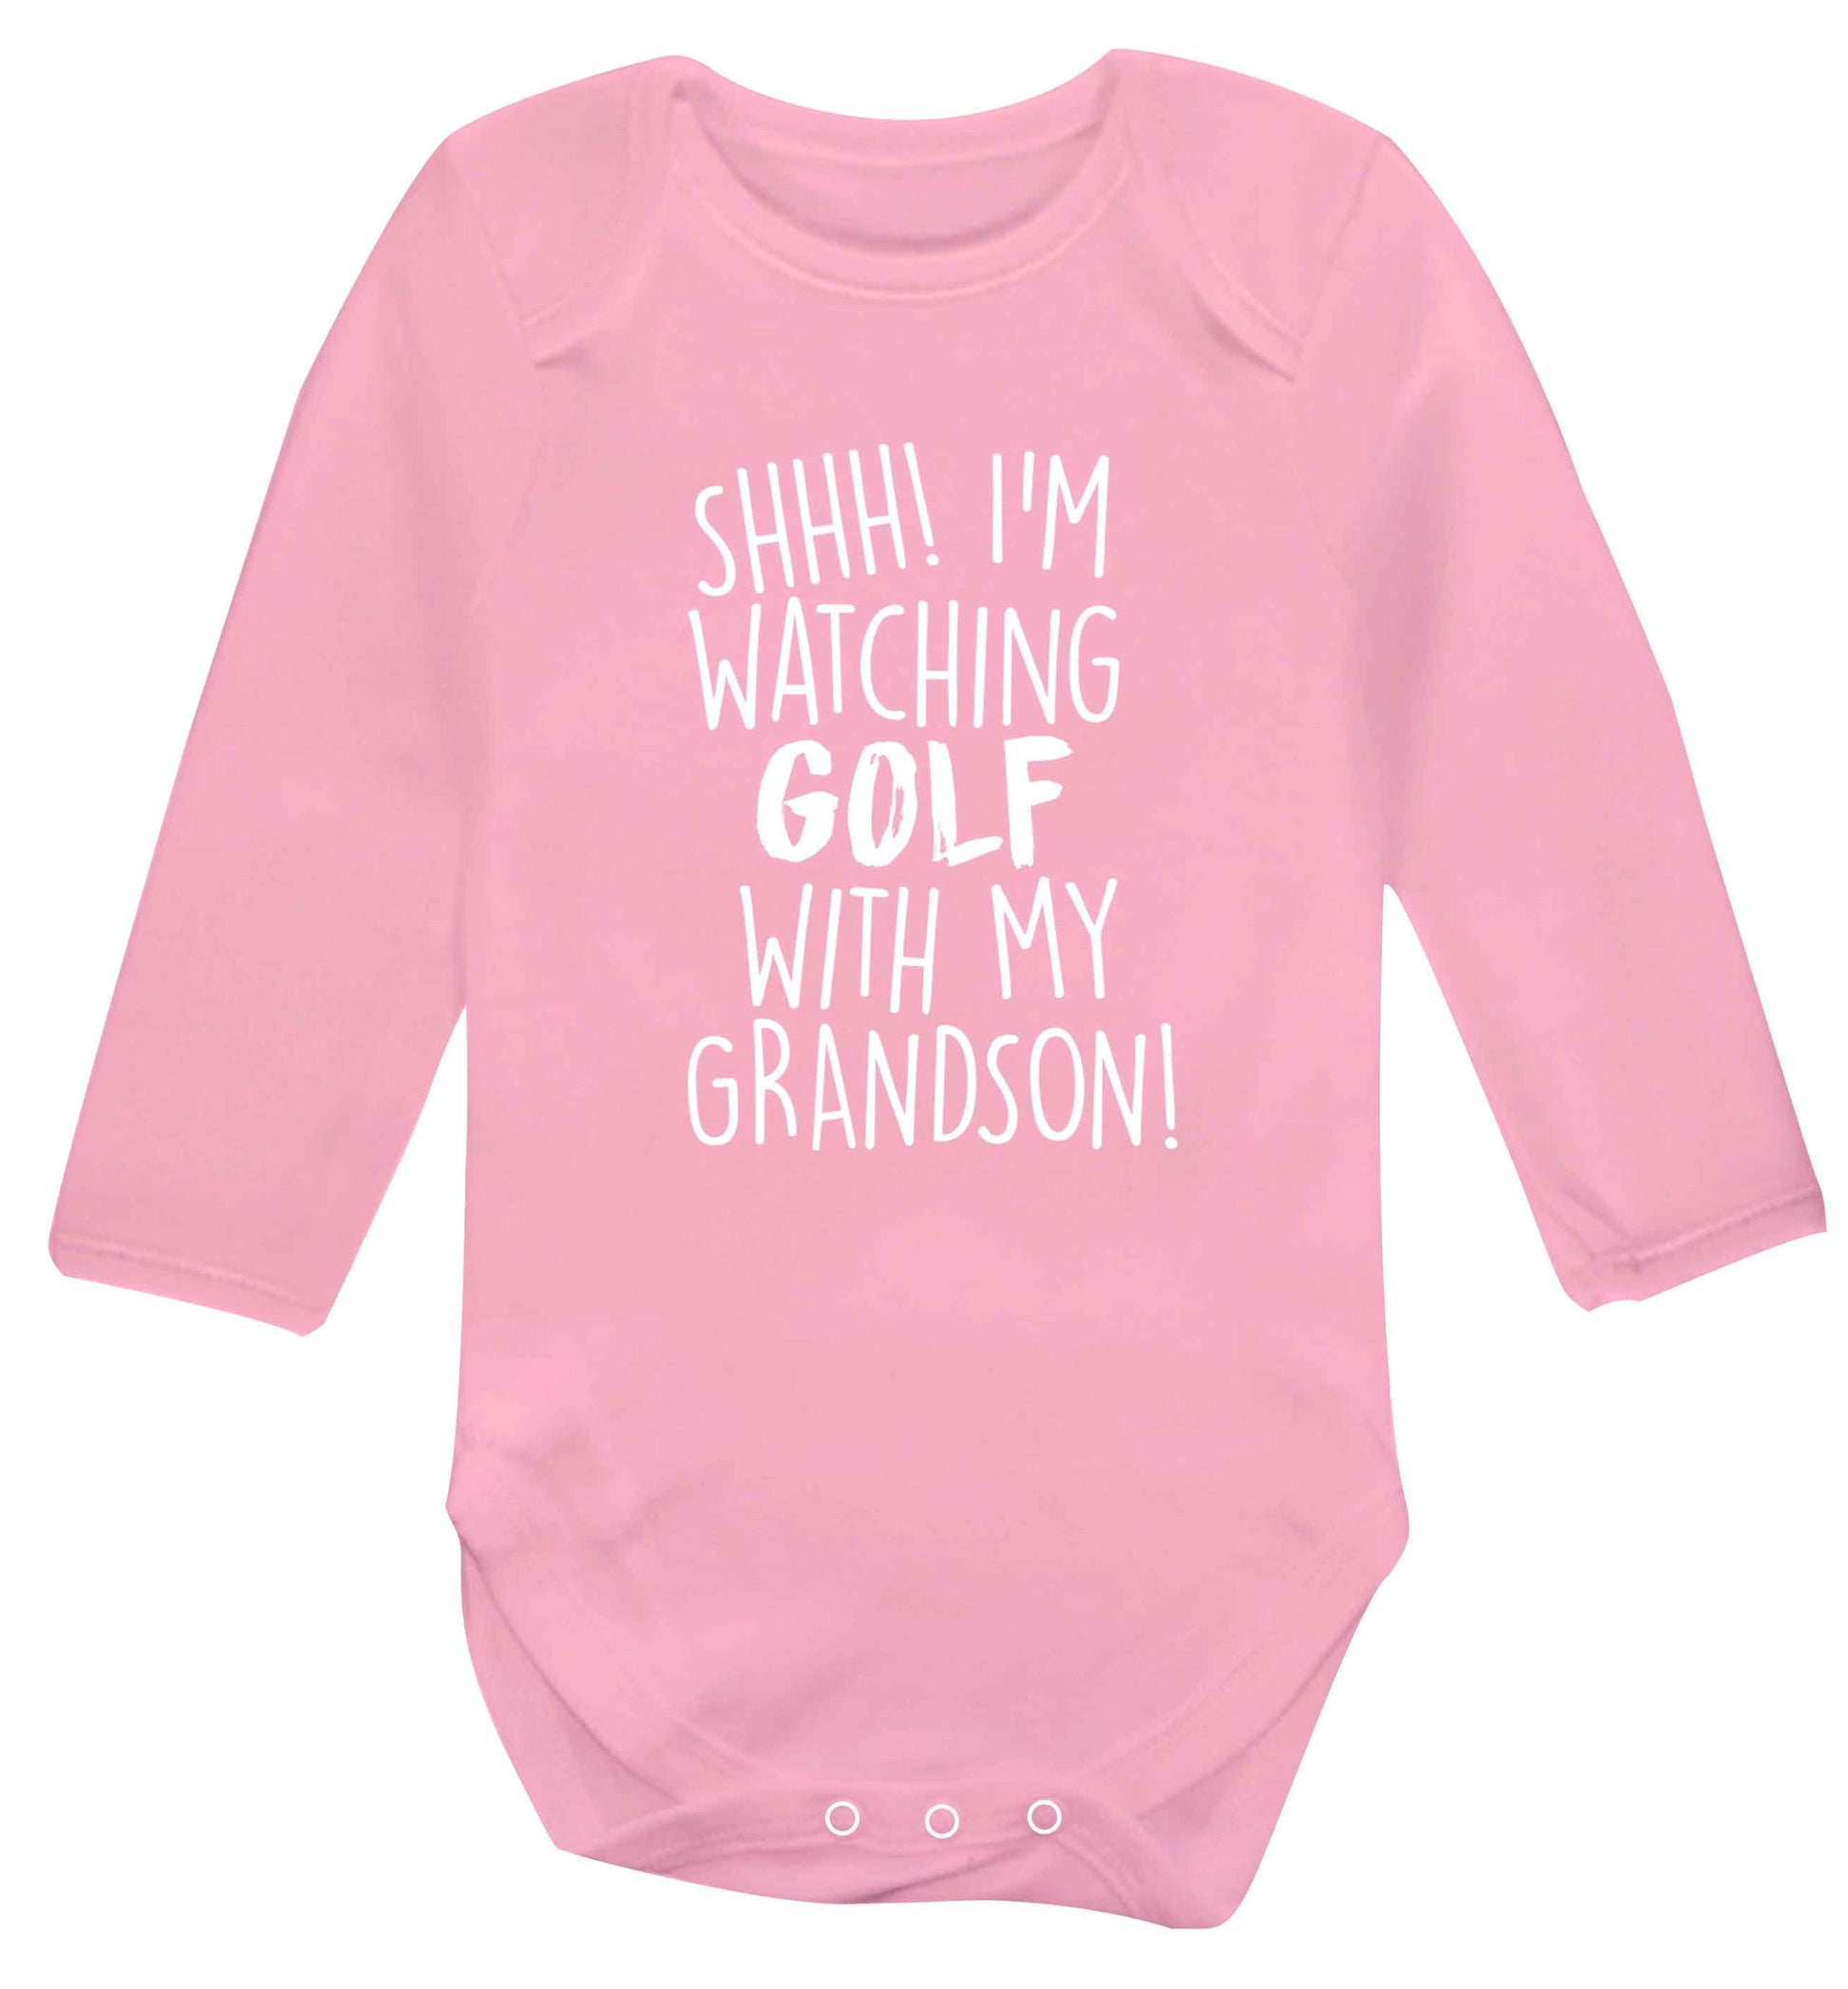 Shh I'm watching golf with my grandsonBaby Vest long sleeved pale pink 6-12 months